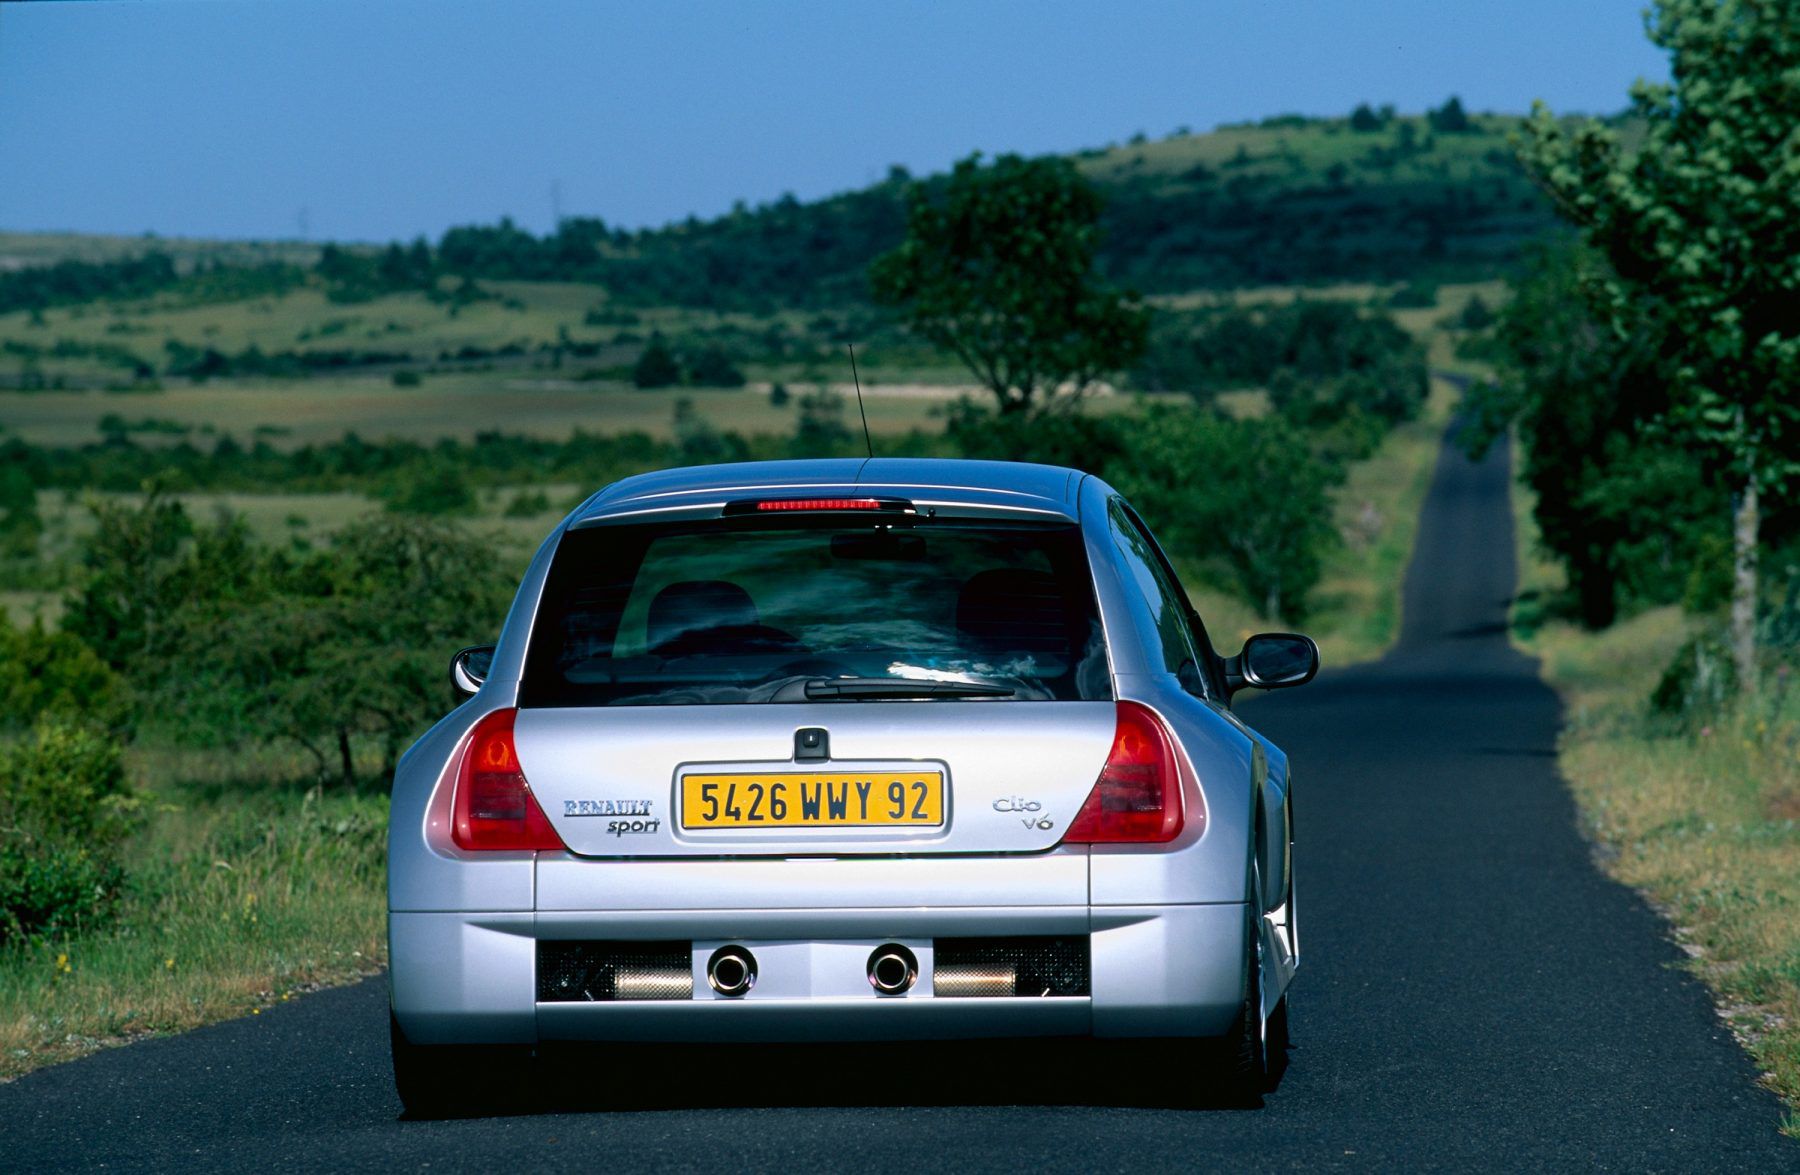 rear view of a renault clio v6 driving down a road